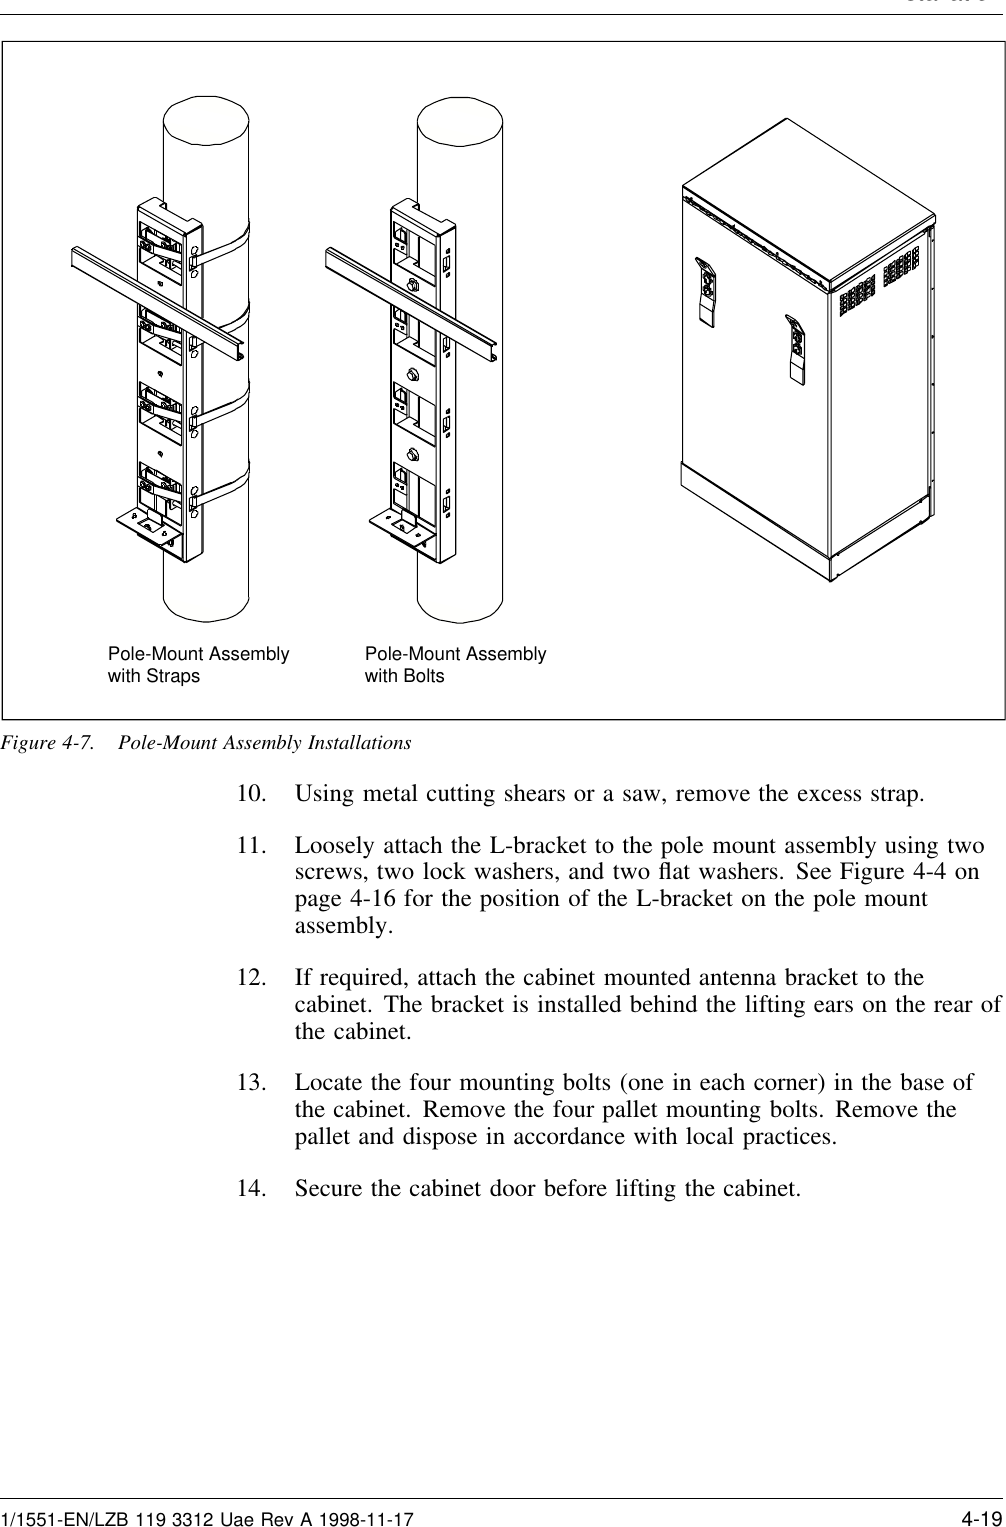 InstallationPole-Mount Assemblywith Straps Pole-Mount Assemblywith BoltsFigure 4-7. Pole-Mount Assembly Installations10. Using metal cutting shears or a saw, remove the excess strap.11. Loosely attach the L-bracket to the pole mount assembly using twoscrews, two lock washers, and two ﬂat washers. See Figure 4-4 onpage 4-16 for the position of the L-bracket on the pole mountassembly.12. If required, attach the cabinet mounted antenna bracket to thecabinet. The bracket is installed behind the lifting ears on the rear ofthe cabinet.13. Locate the four mounting bolts (one in each corner) in the base ofthe cabinet. Remove the four pallet mounting bolts. Remove thepallet and dispose in accordance with local practices.14. Secure the cabinet door before lifting the cabinet.1/1551-EN/LZB 119 3312 Uae Rev A 1998-11-17 4-19